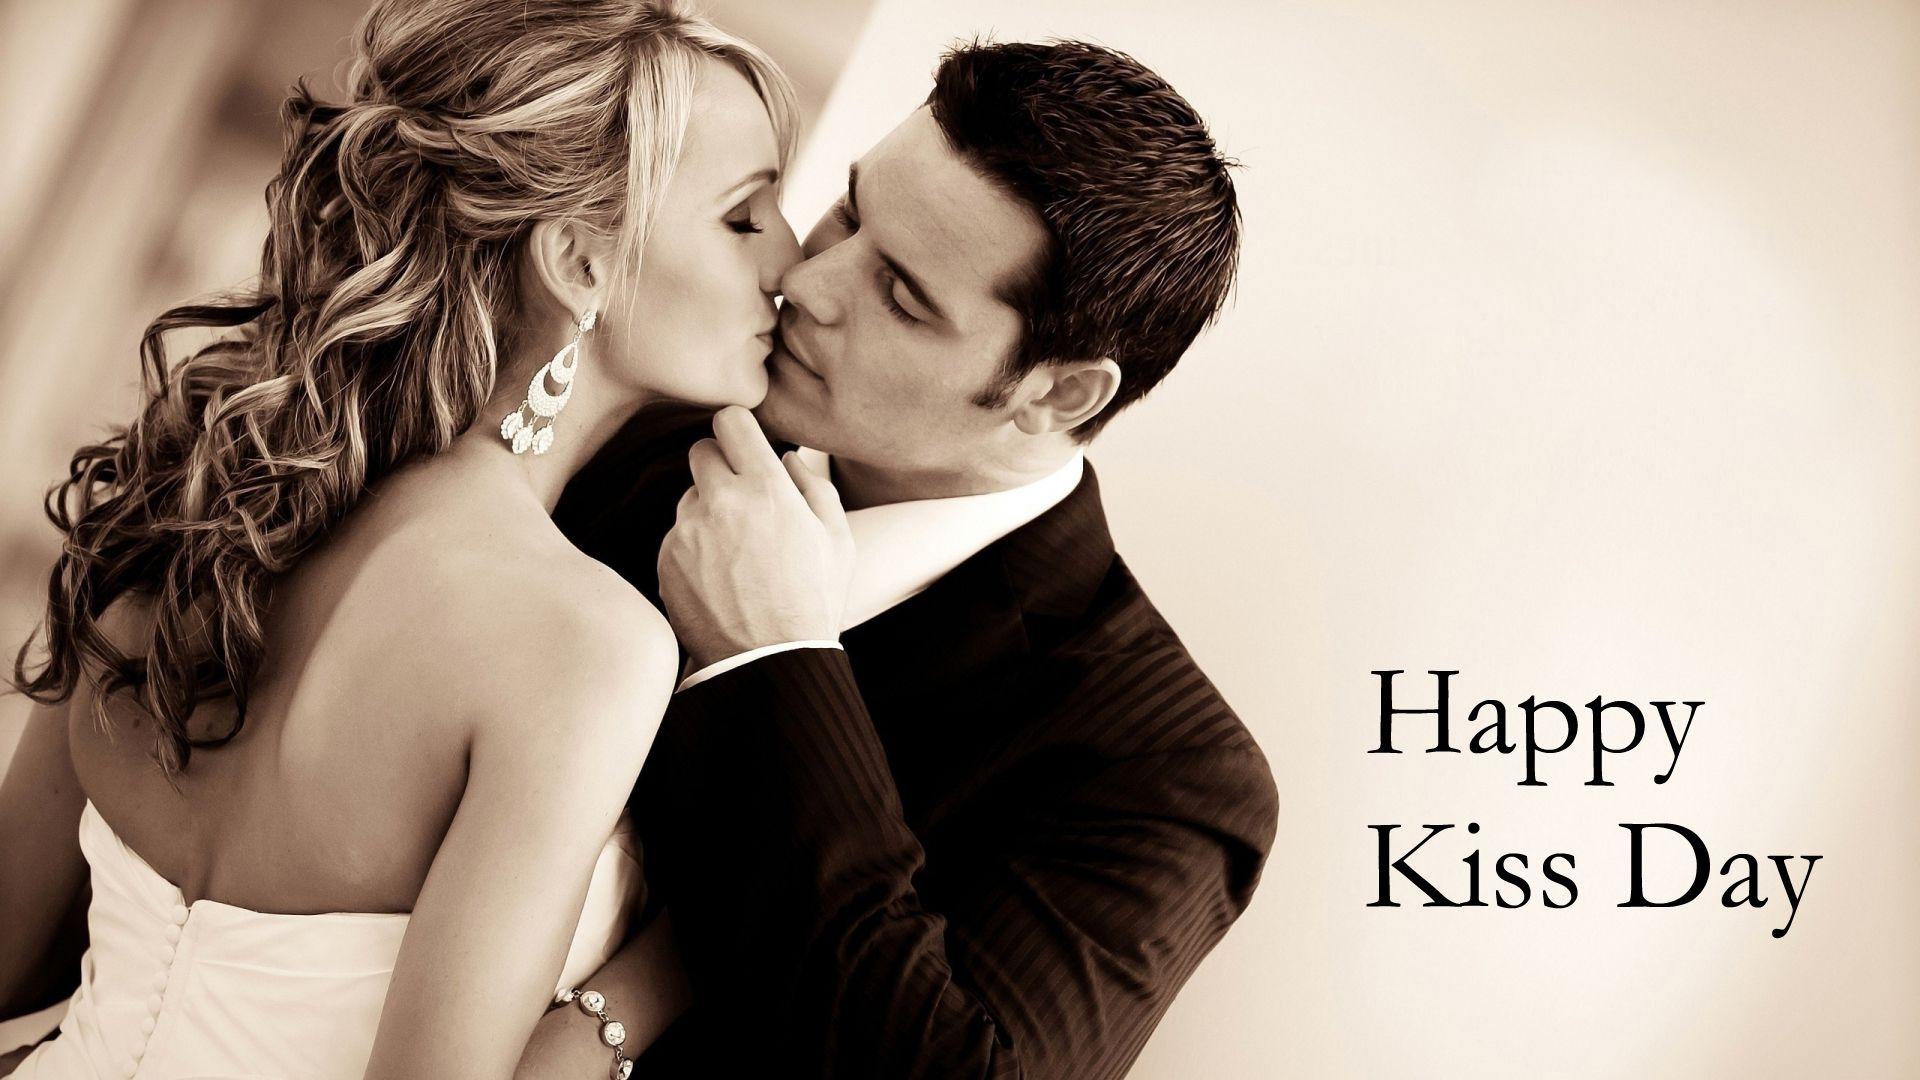 Happy Kiss Day Image, Cute Picture, Romantic Quotes, HD